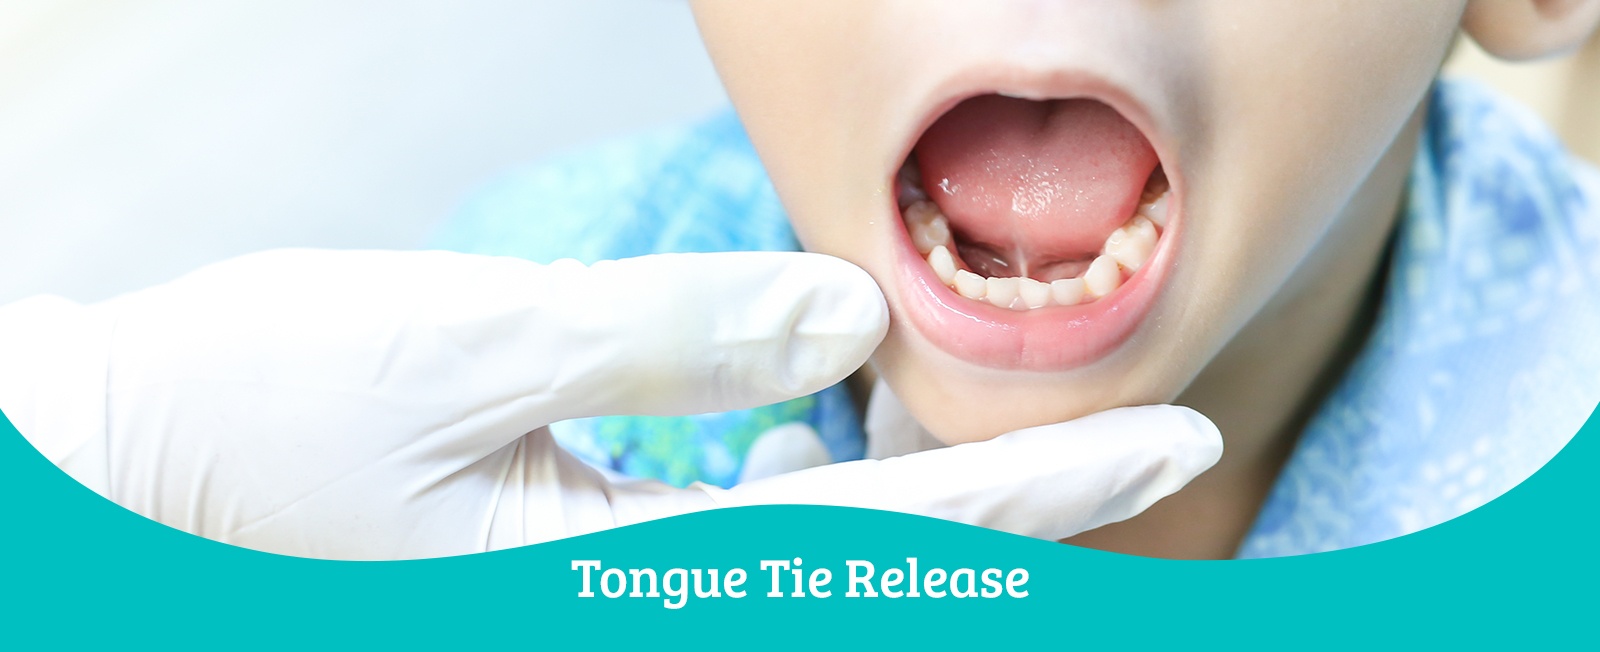 Tongue Tie Release Treatment in Toronto, ON